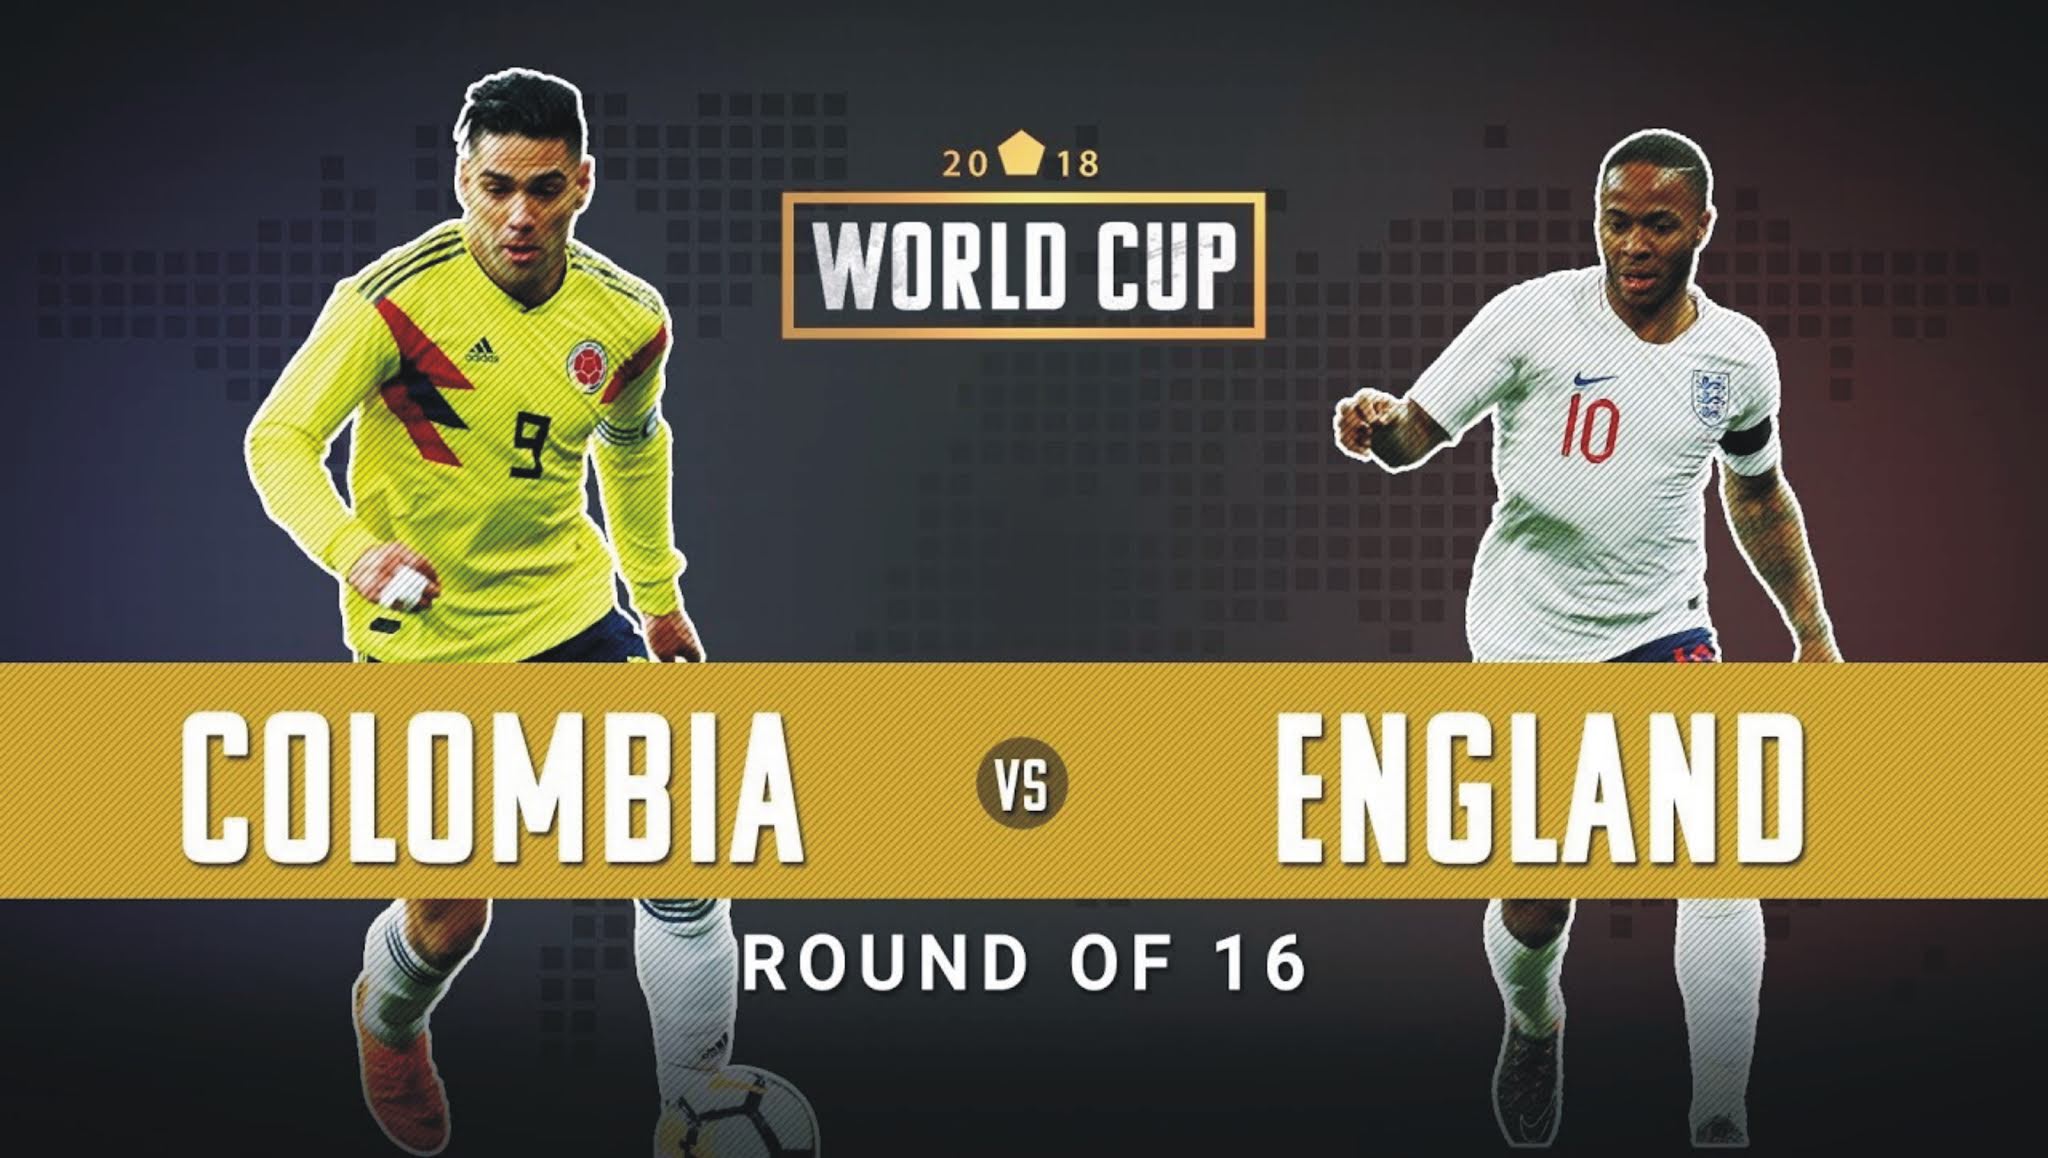 Colombia vs England TV Channel Coverage info – Round of 16